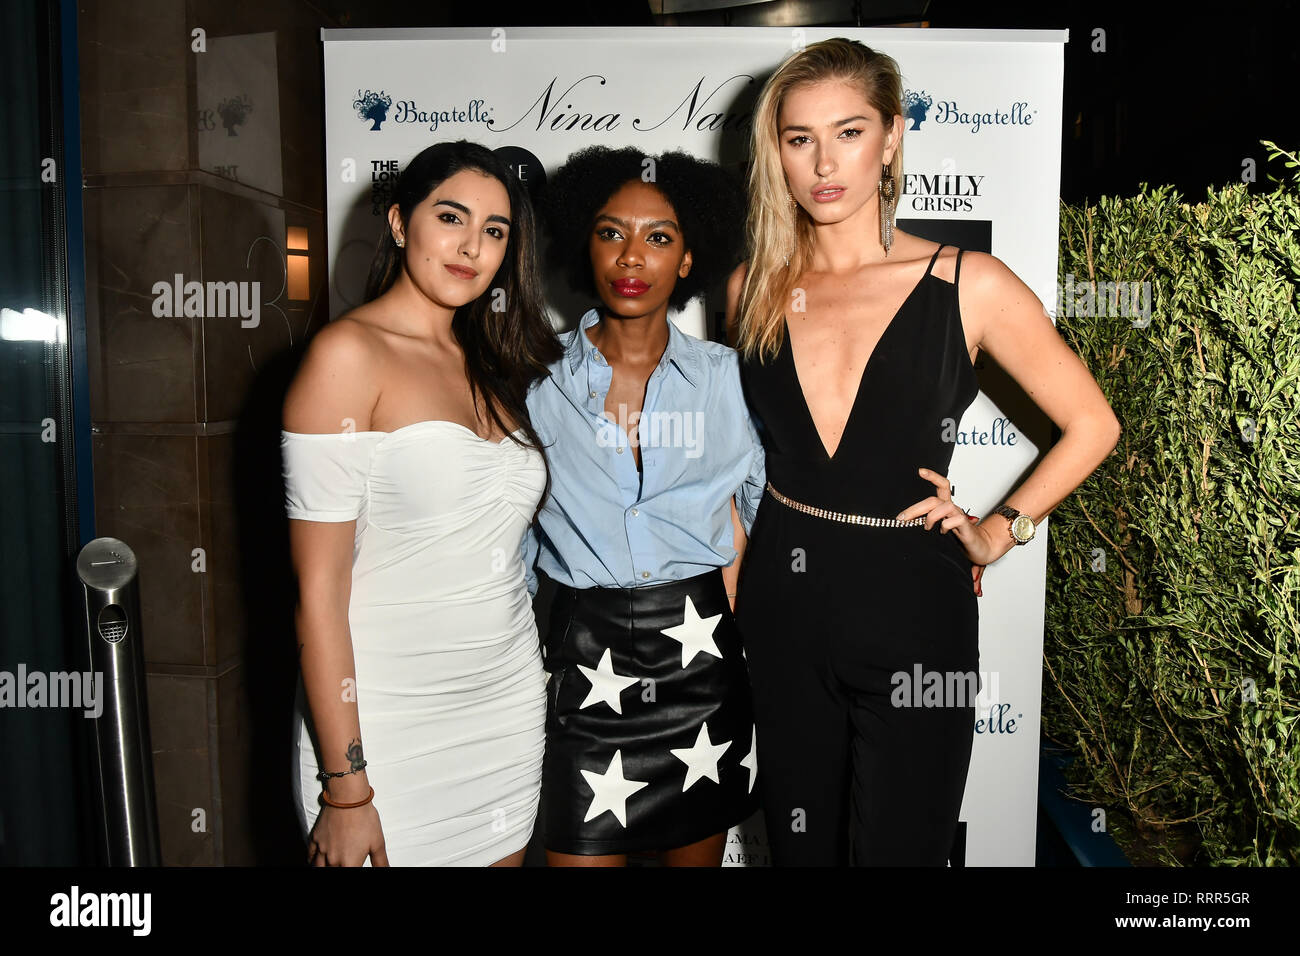 London, UK. 26th Feb 2019. Claudia Sowaha,Tonique Campbell and Lilly Douse Arrivers at Nina Naustdal catwalk show SS19/20 collection by The London School of Beauty & Make-up at Bagatelle on 26 Feb 2019, London, UK. Credit: Picture Capital/Alamy Live News Stock Photo